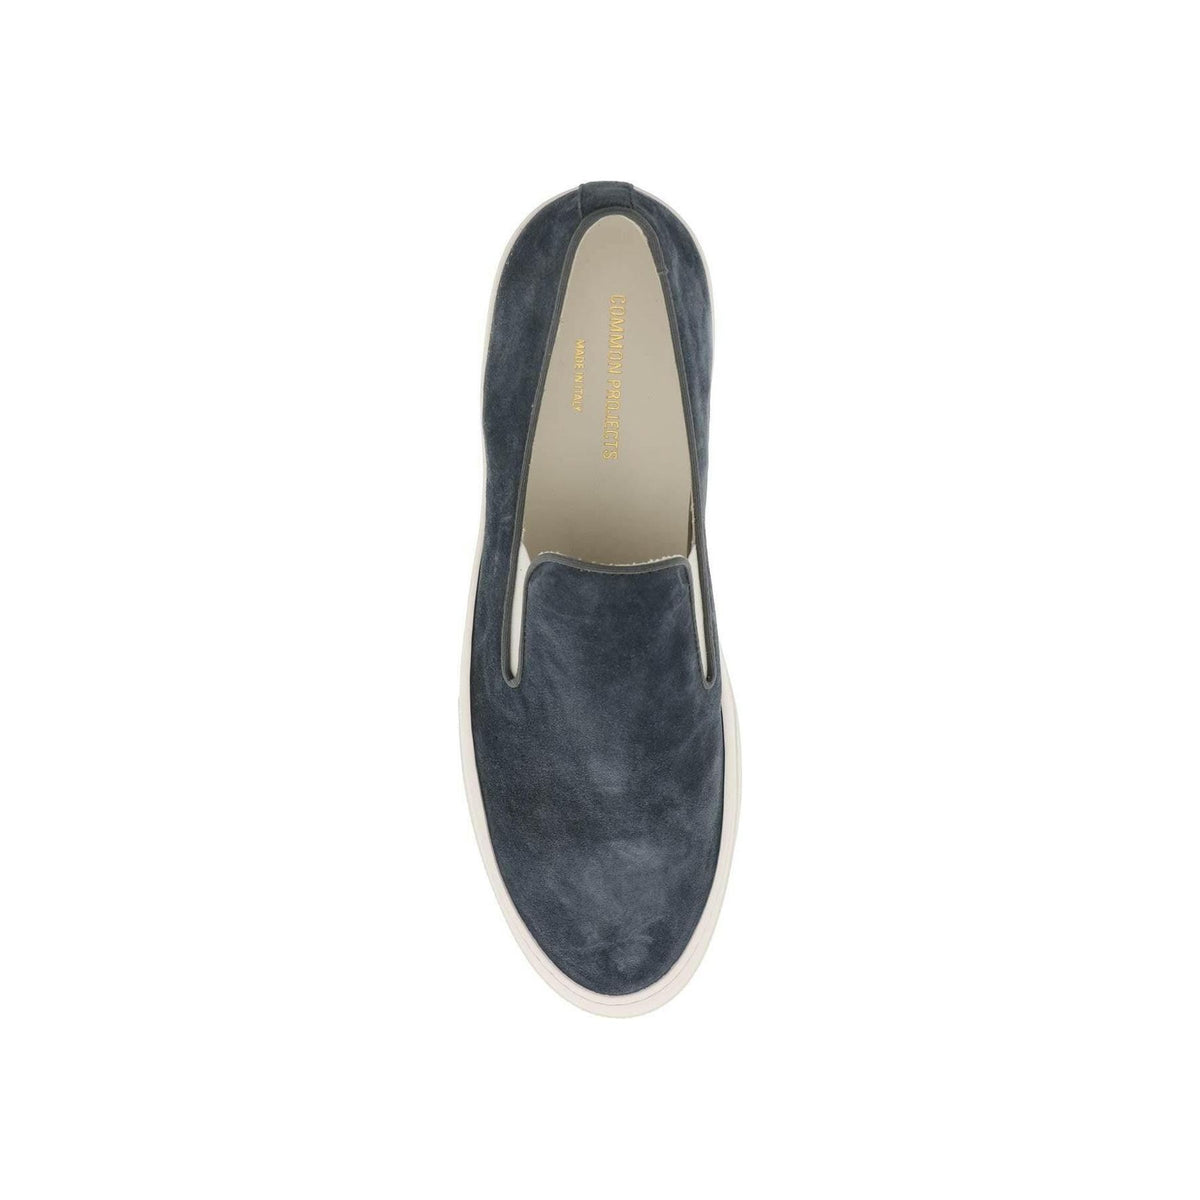 COMMON PROJECTS - Navy Slip-On Suede Sneakers - JOHN JULIA